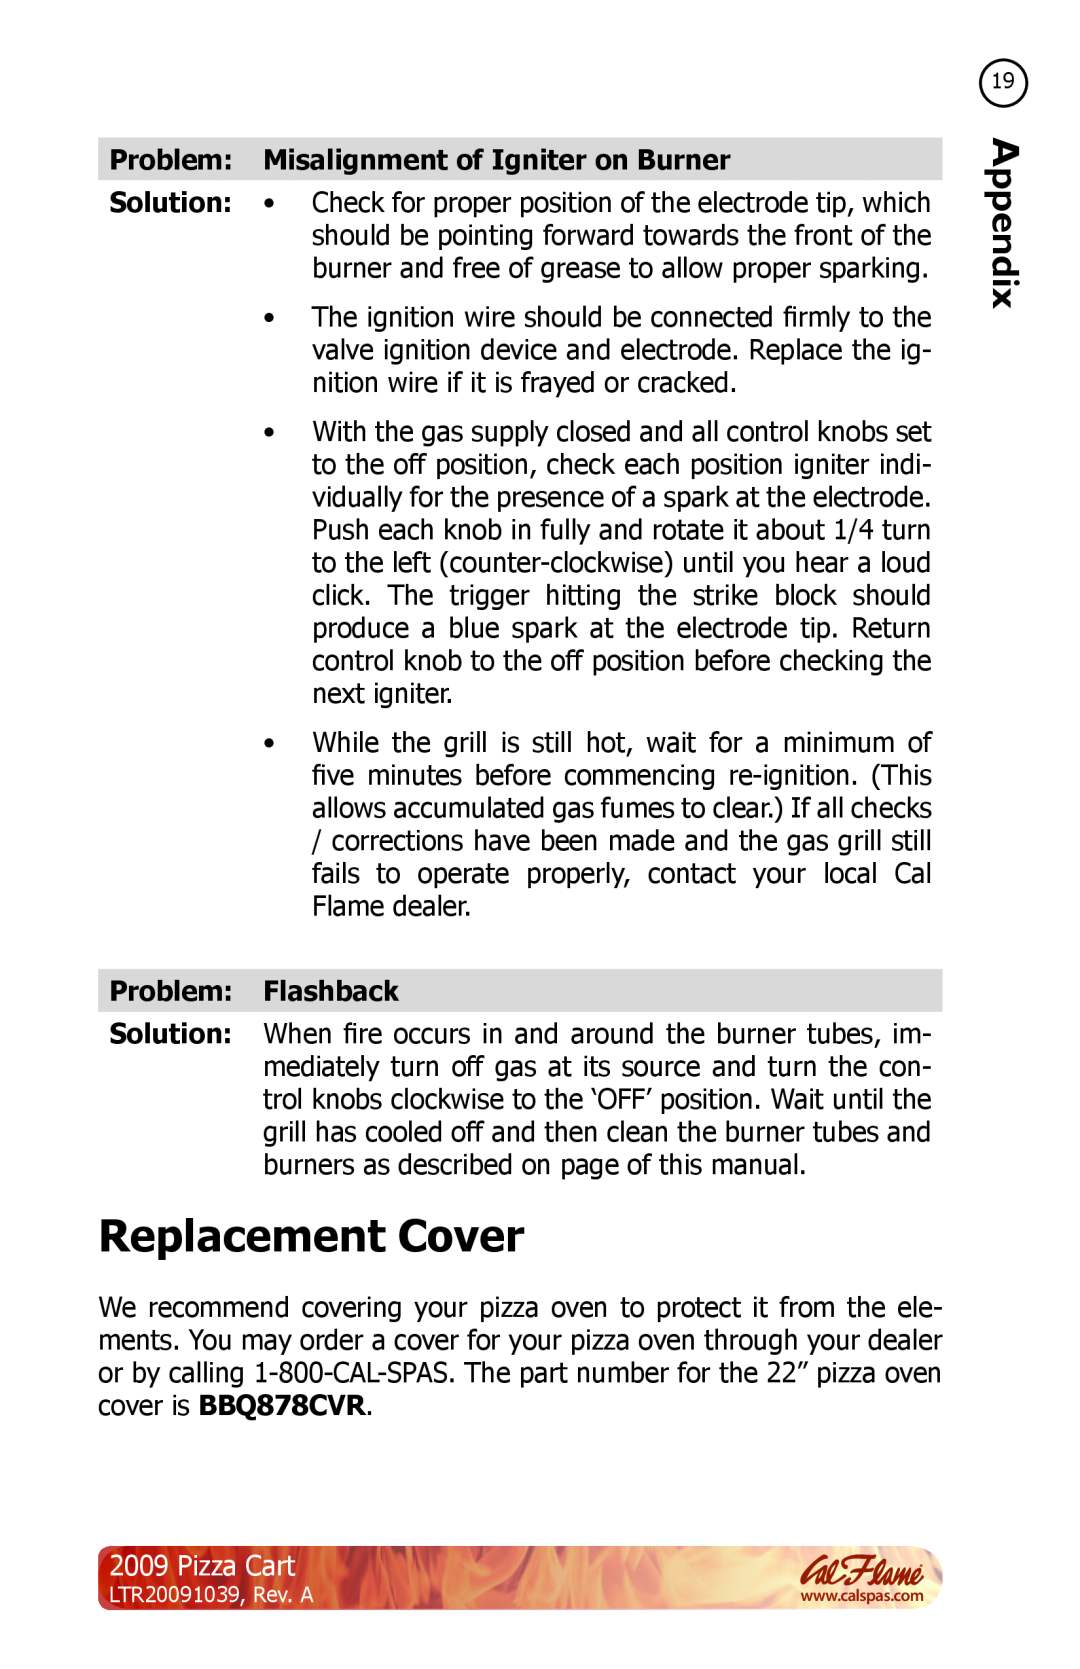 Cal Flame LTR20091039 manual Replacement Cover, Problem Misalignment of Igniter on Burner, Problem Flashback, Pizza Cart 